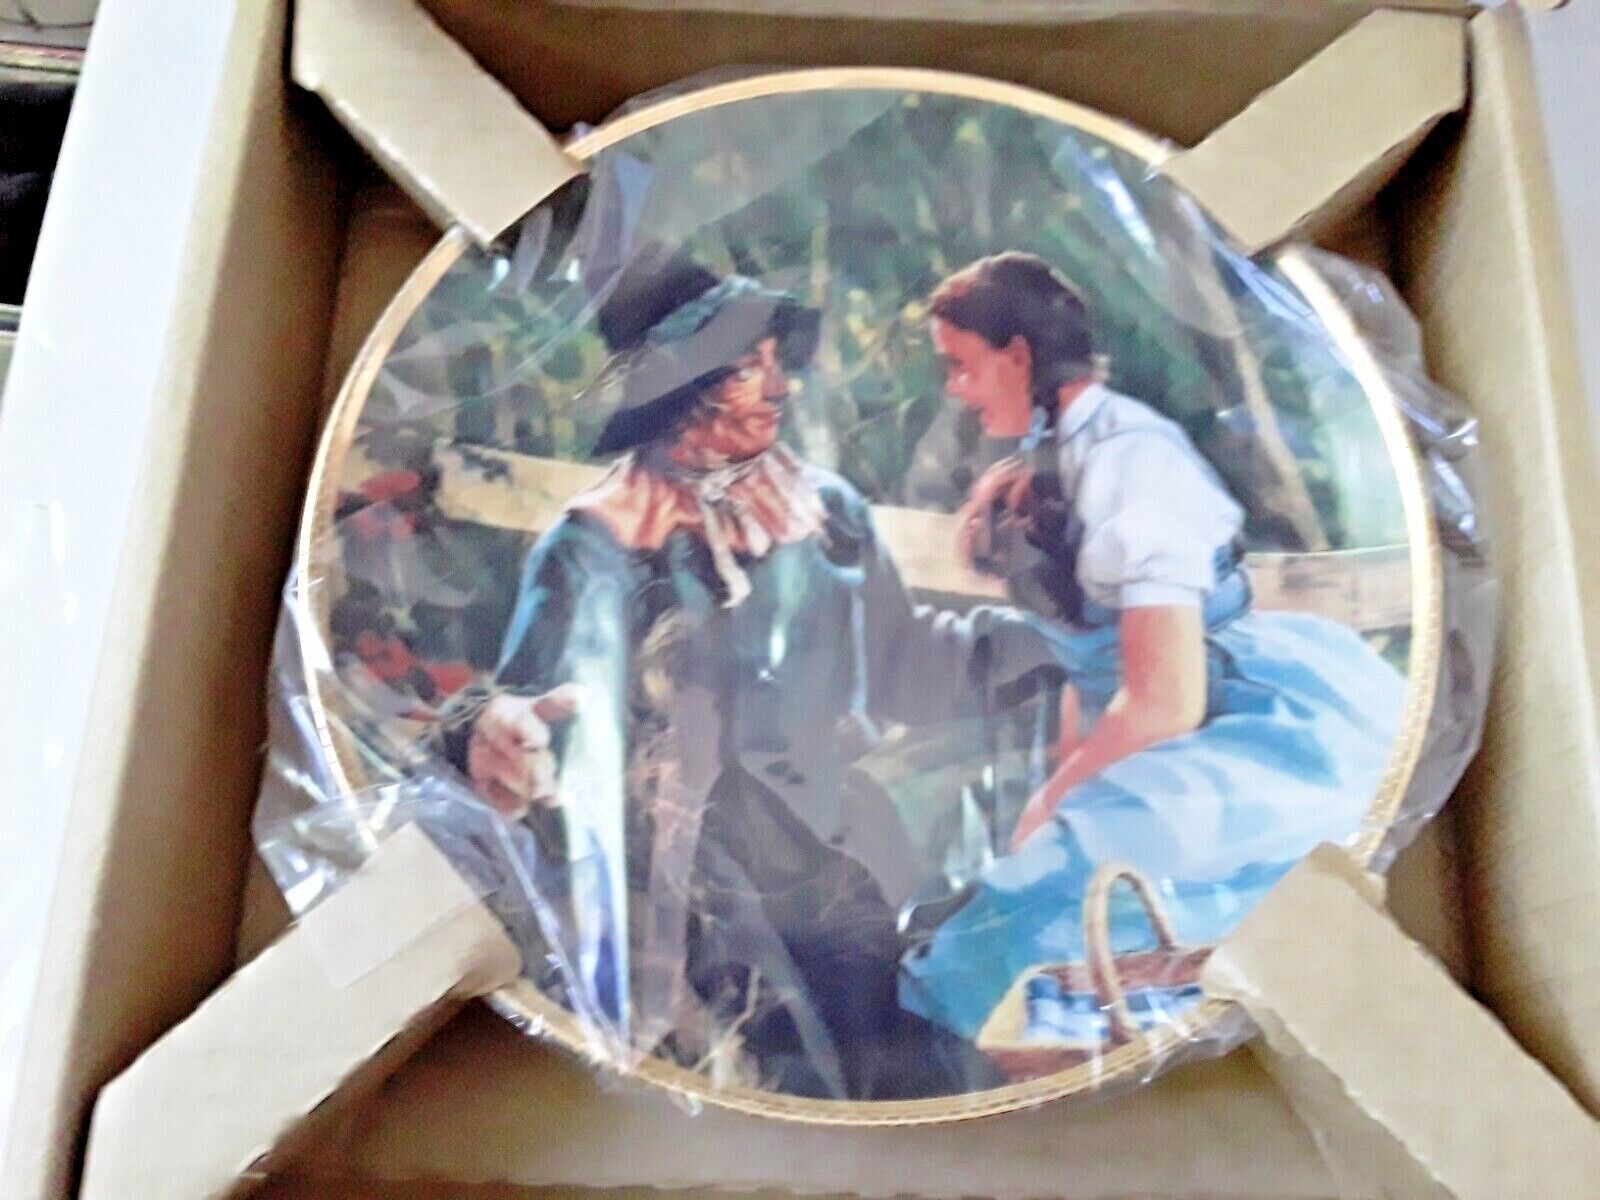 Primary image for "Dorothy Meets the Scarecrow" Hamilton Collection "Wizard Of Oz" Collector Plate